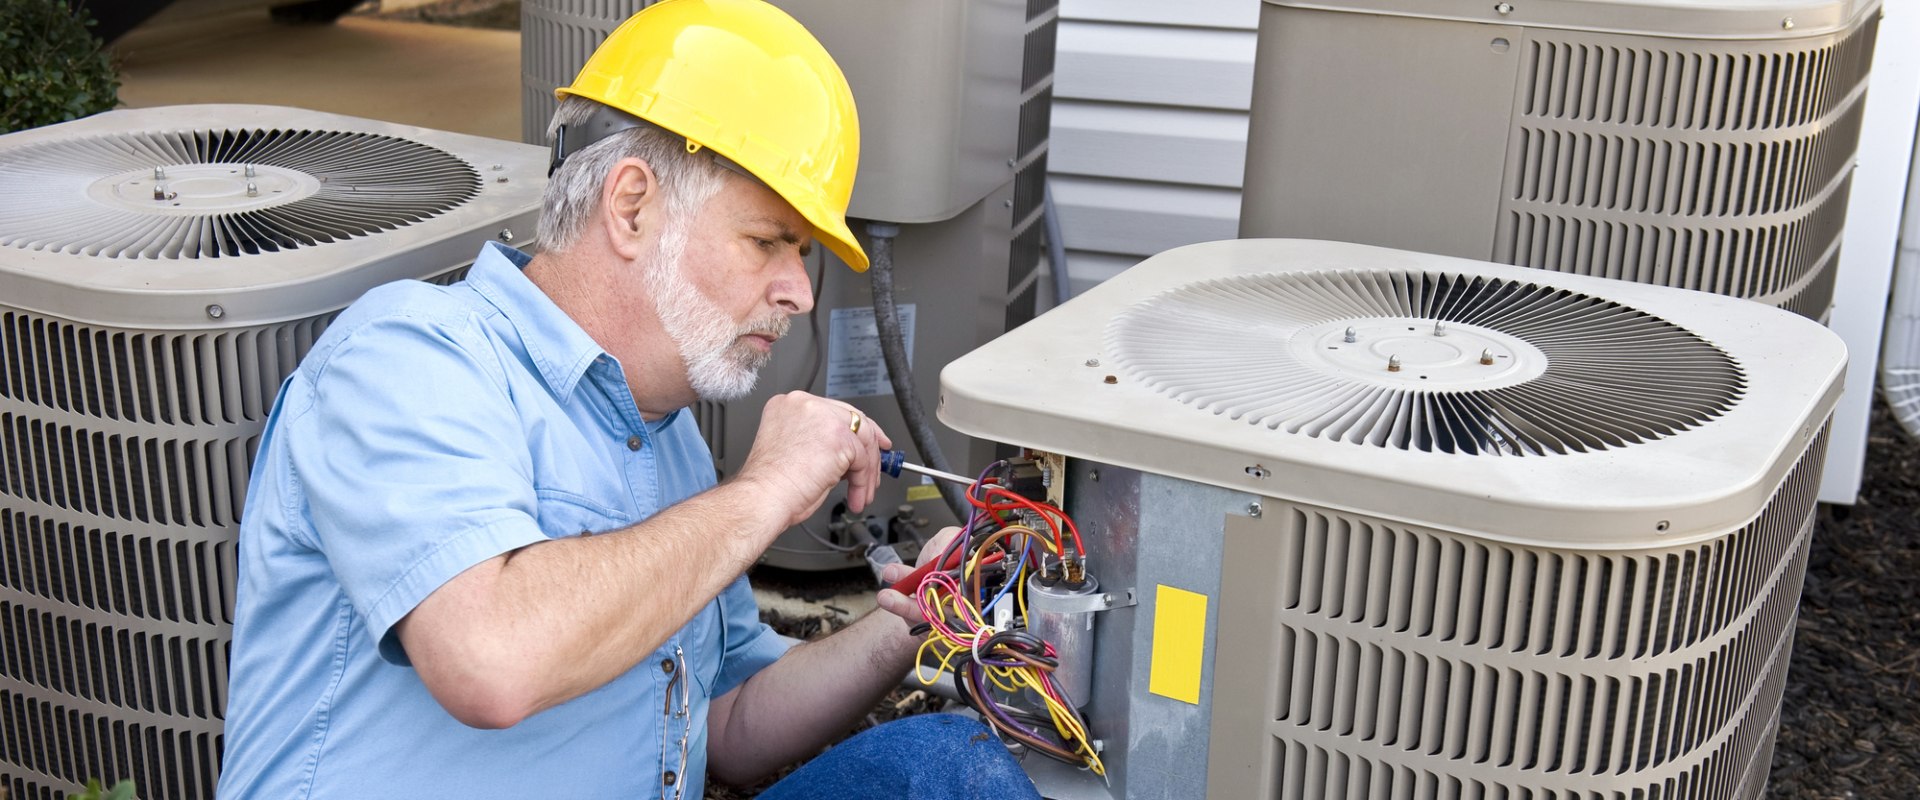 How long does an air conditioning tune-up take?